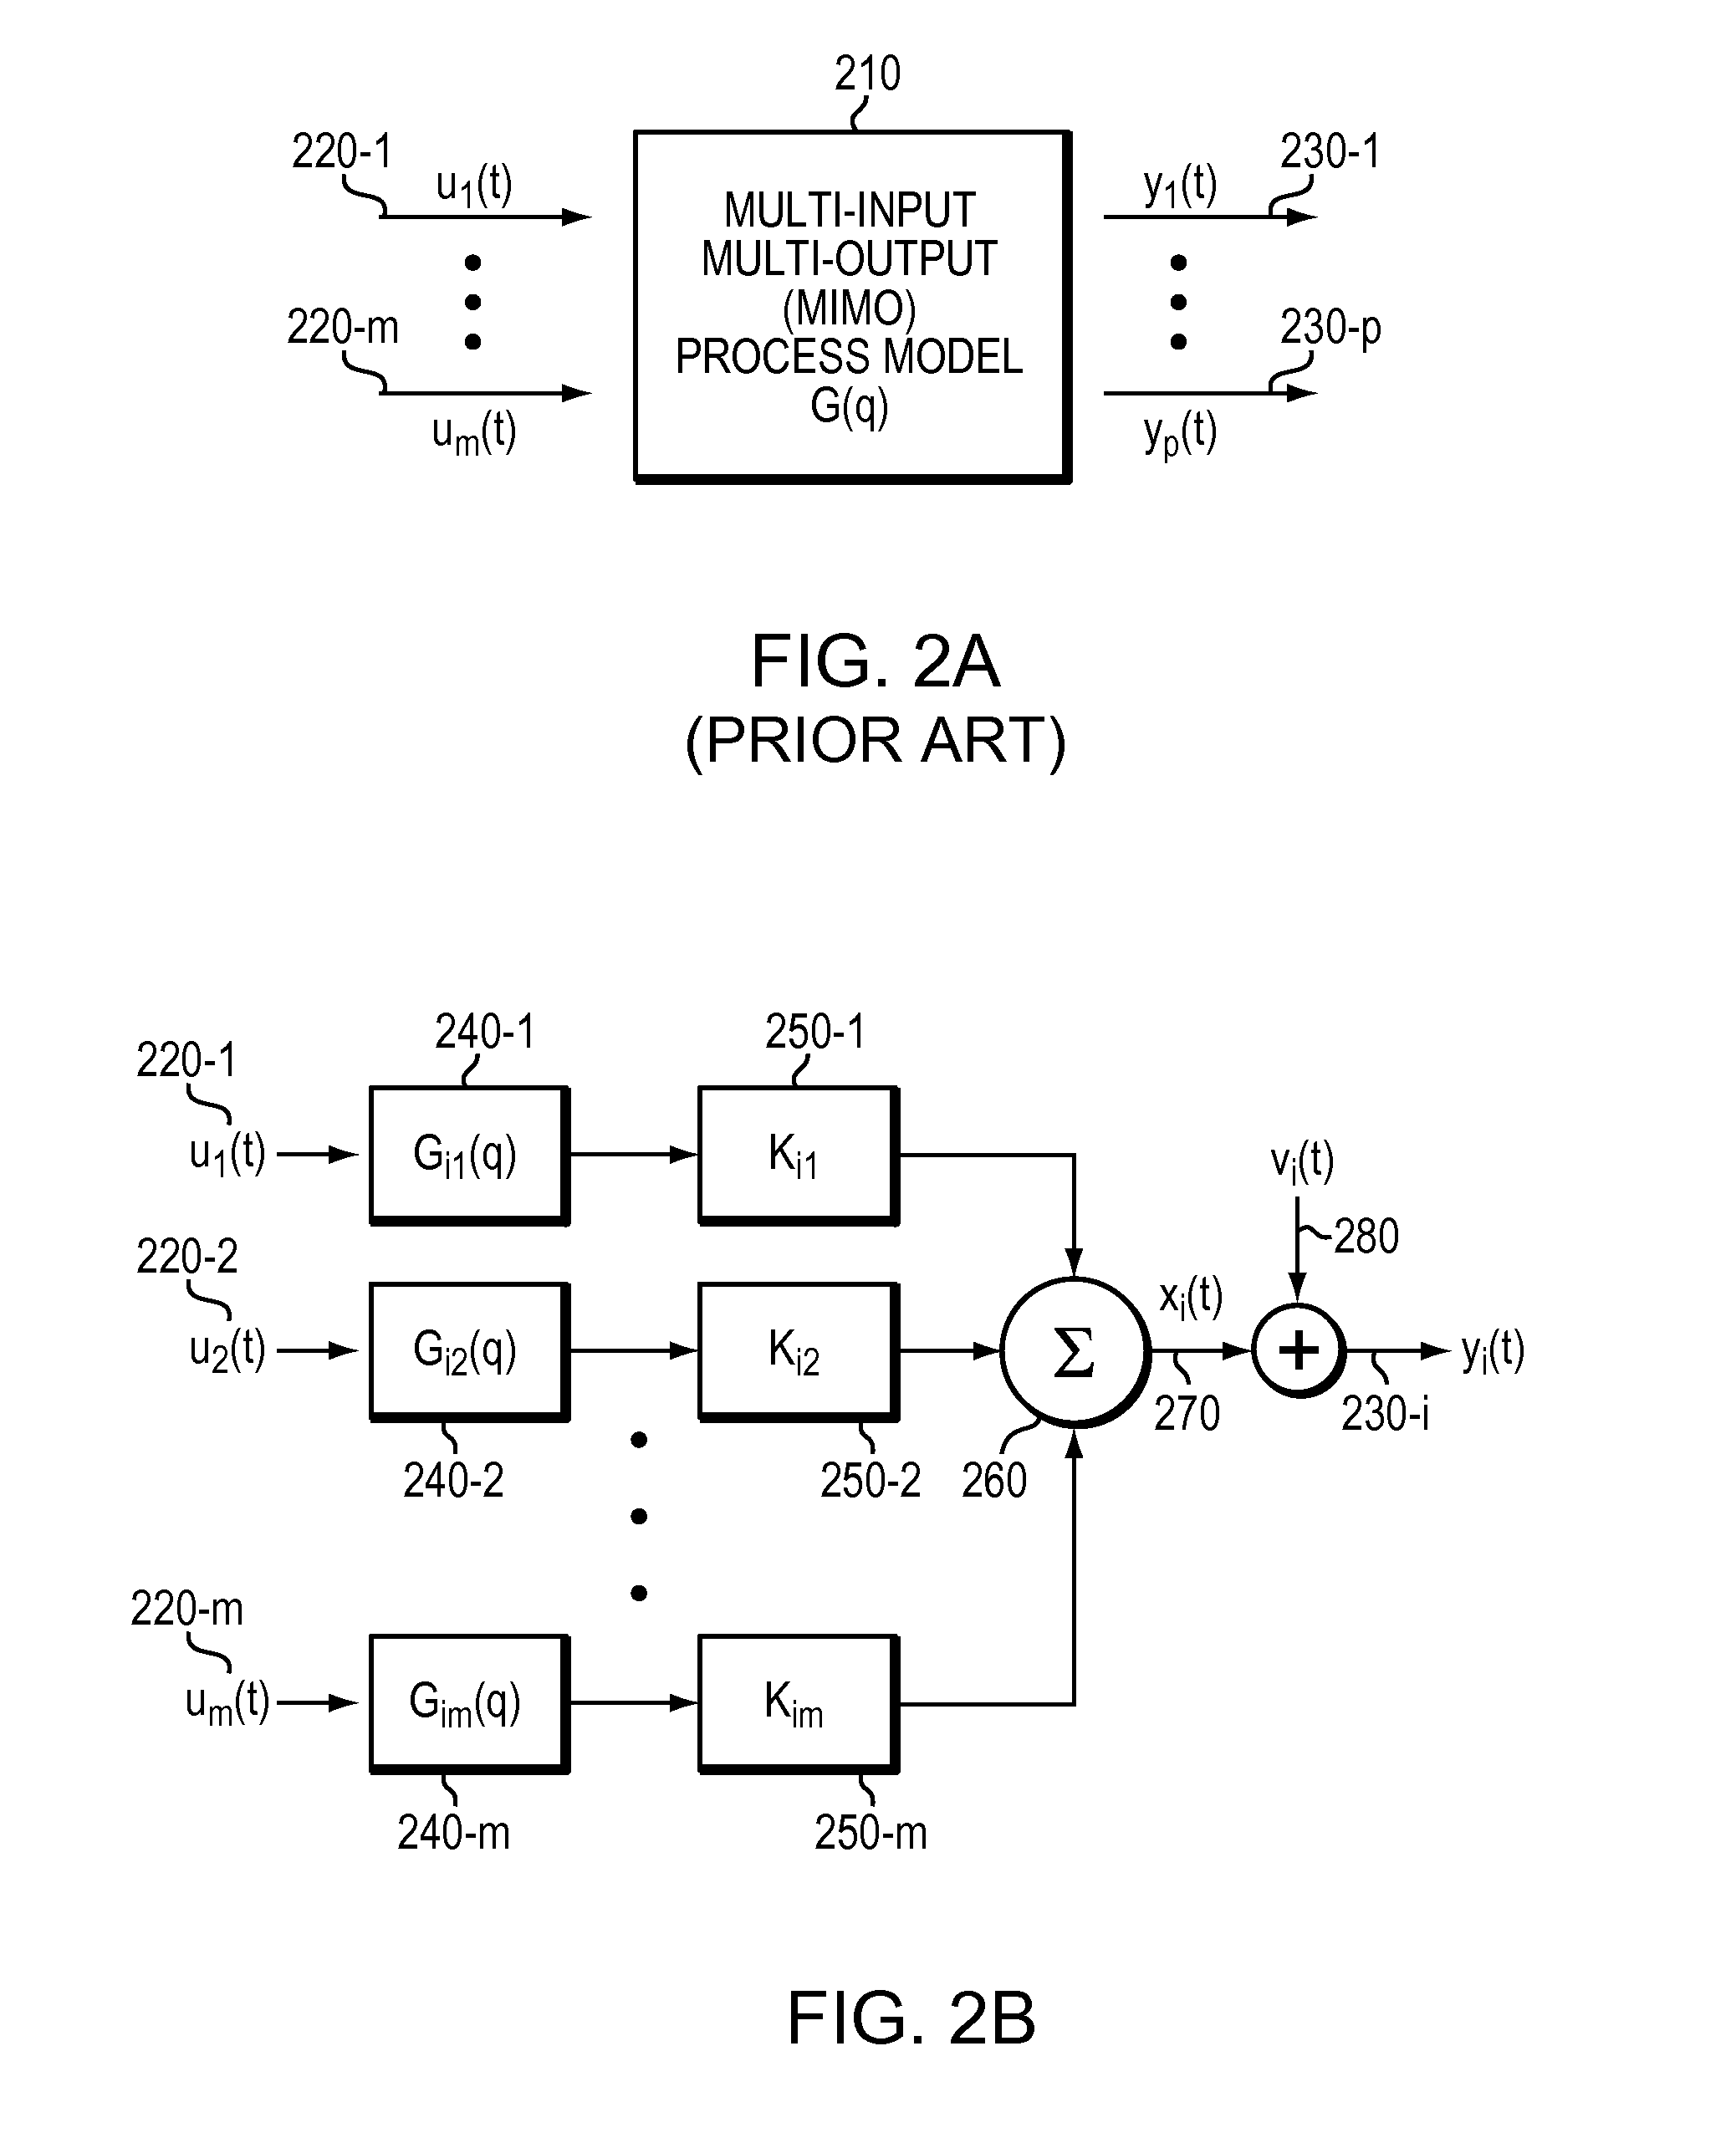 Apparatus and method for model quality estimation and model adaptation in multivariable process control